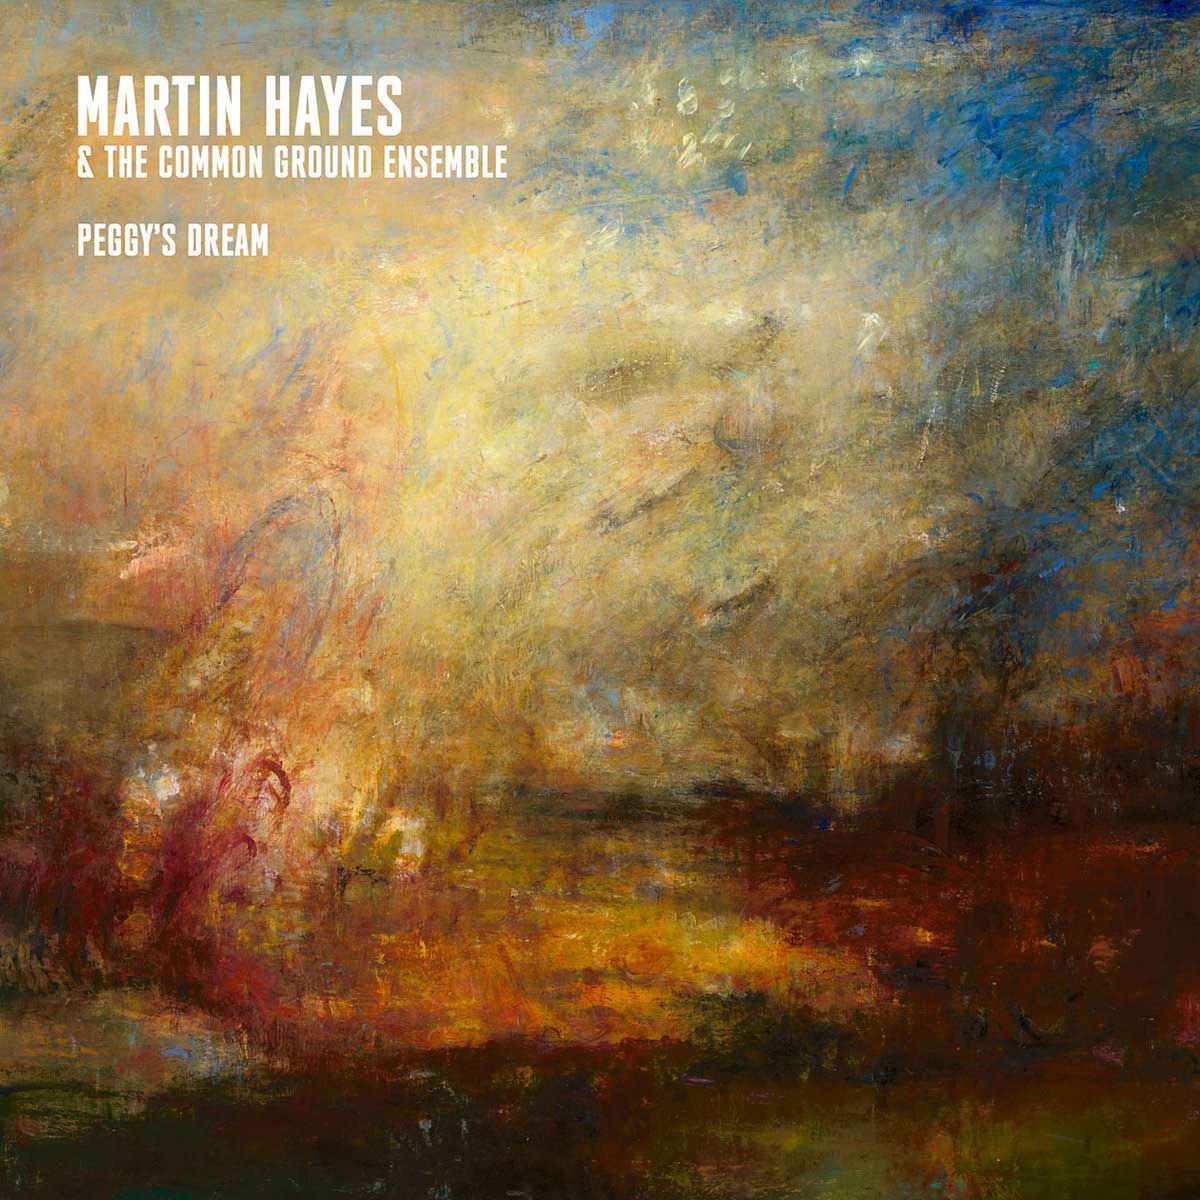 “Peggy’s Dream” (251/Faction Records - 2023) by The Common Ground Ensemble is the latest iteration of Clare fiddler Martin Hayes' (@MHayesmusic) perpetual quest for invention within the Irish tradition: spellbindingmusic.com/martin-hayes-t…